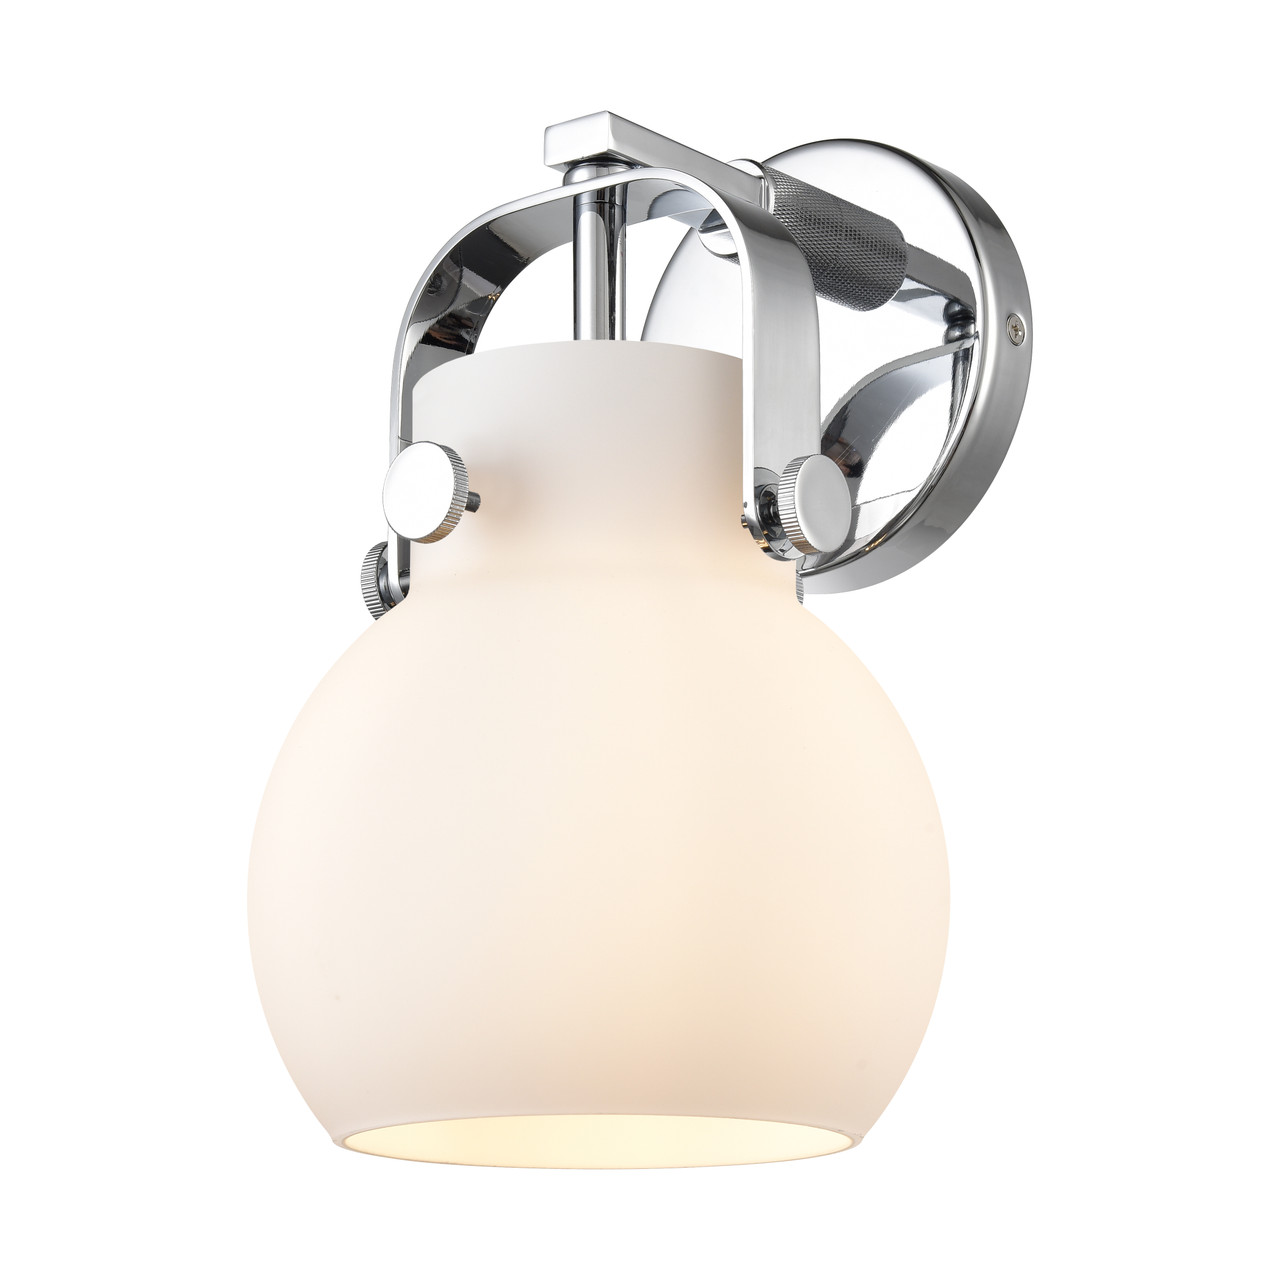 INNOVATIONS 423-1W-PC-G410-6WH Pilaster II Sphere 1 6.5 inch Sconce Polished Chrome